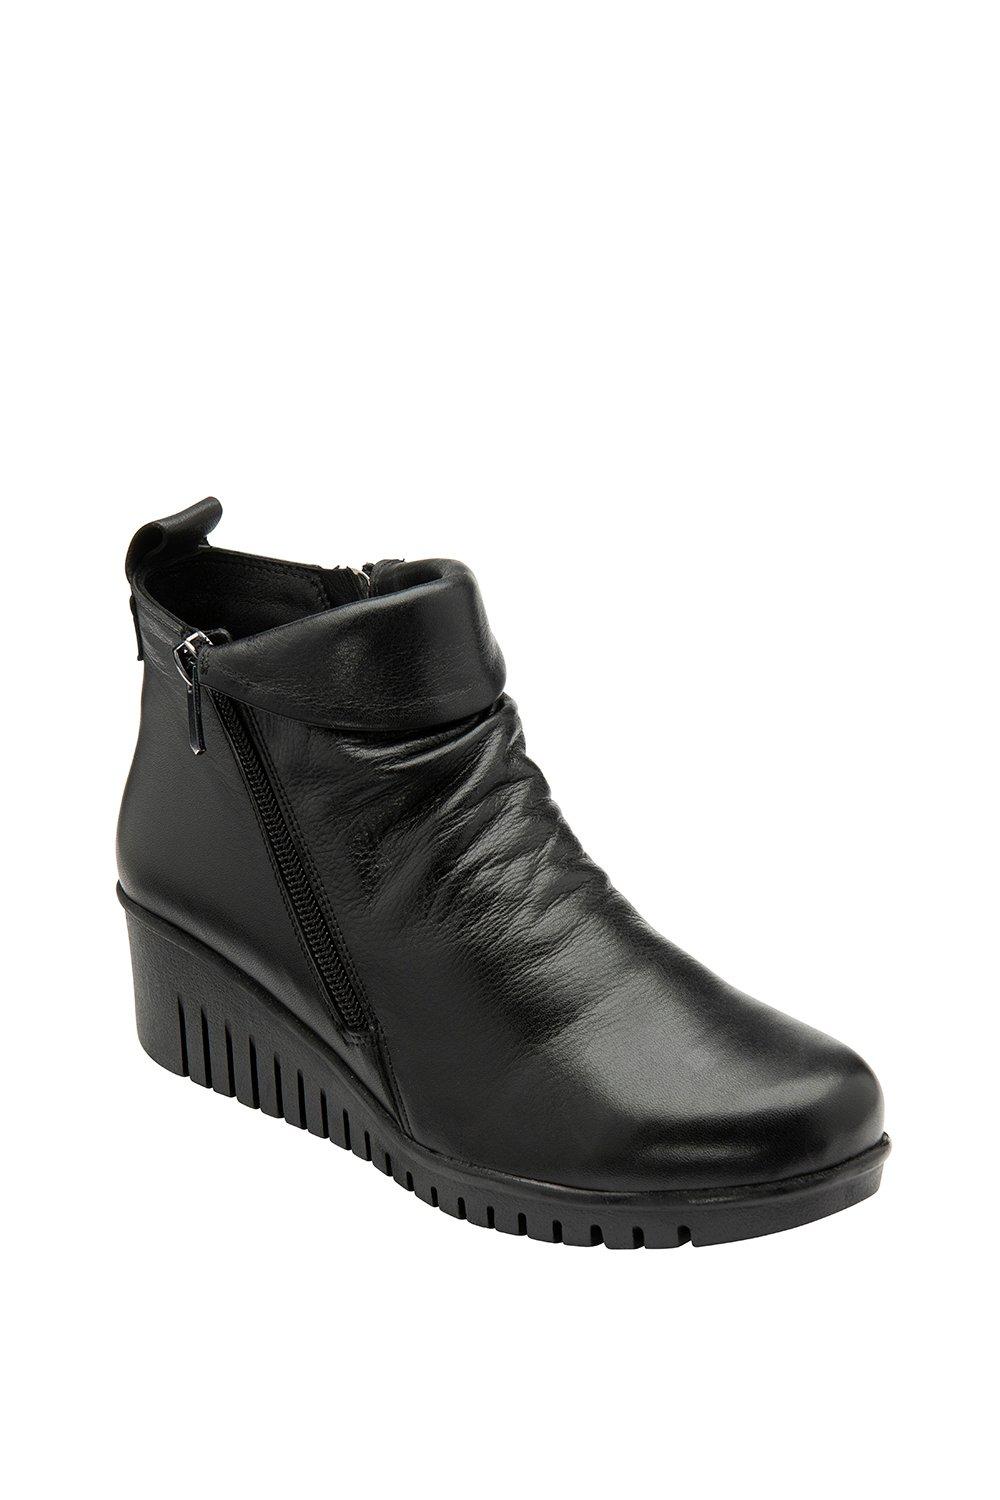 Boots | 'Cordelia' Leather Wedge Ankle Boots | Lotus